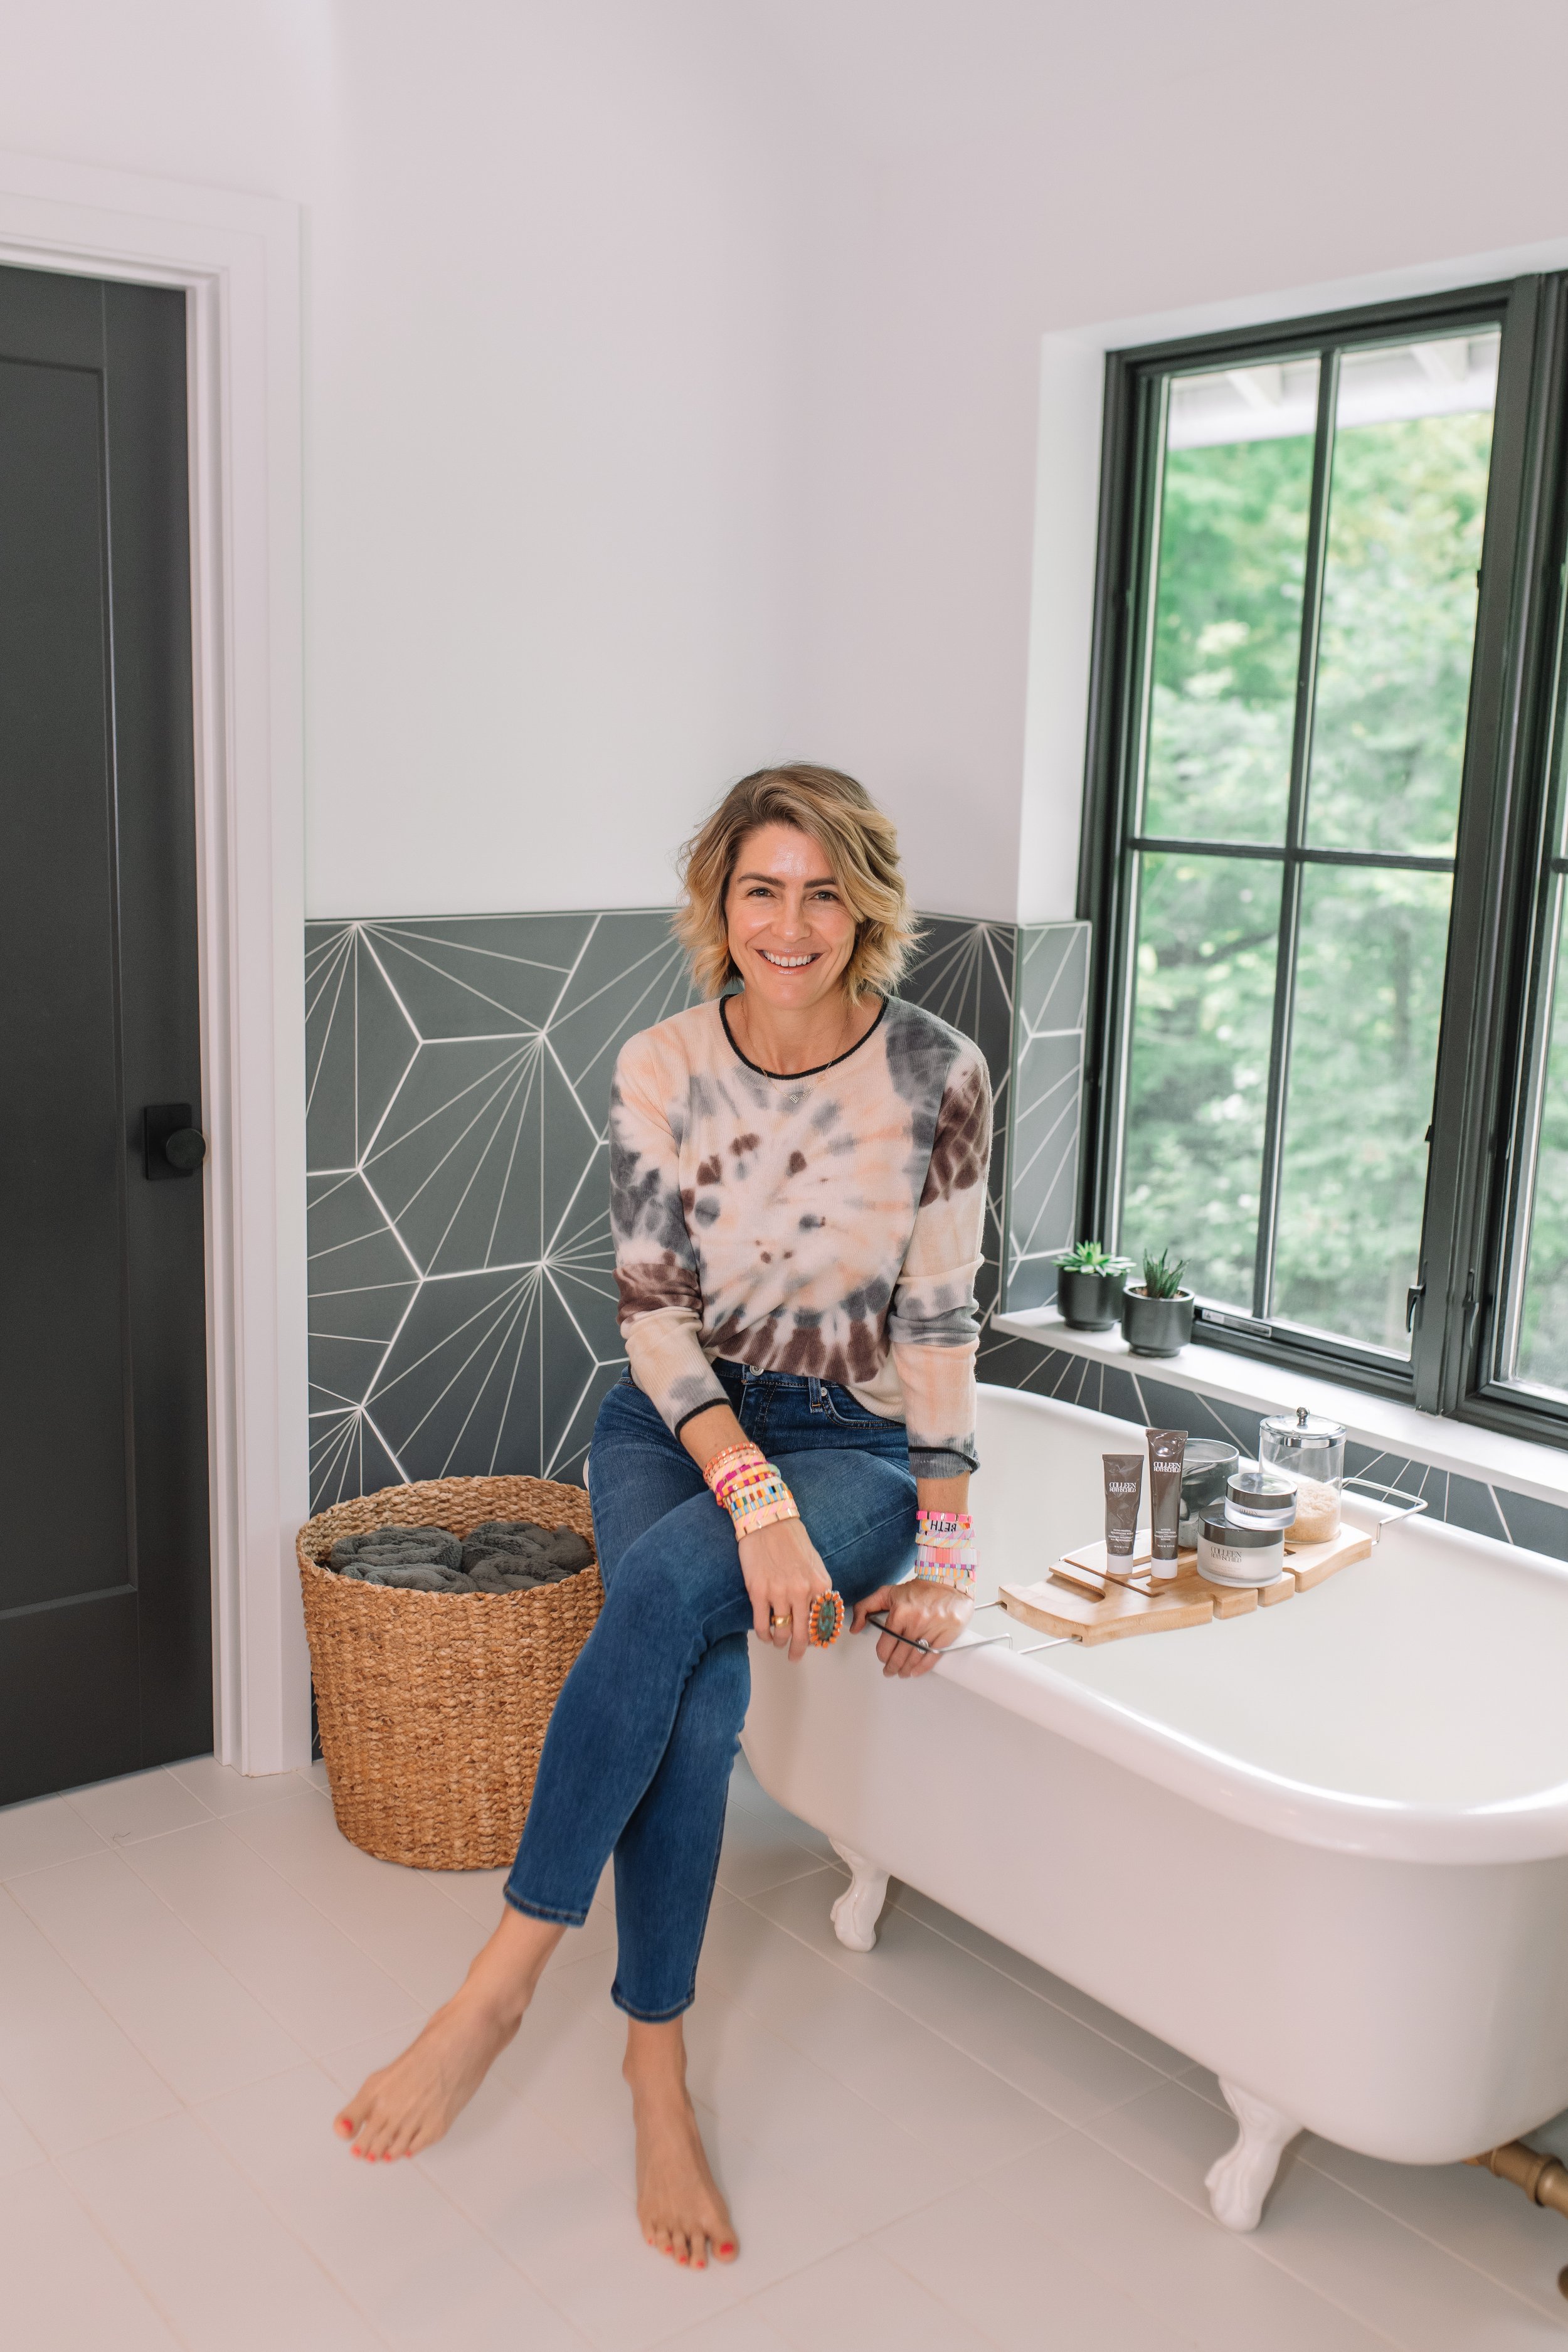 Colleen Rothschild by popular Indianapolis beauty blog, Seersucker and Saddles: image of a woman sitting on the edge of her claw foot tub next to a tub tray containing various Colleen Rothschild products. 